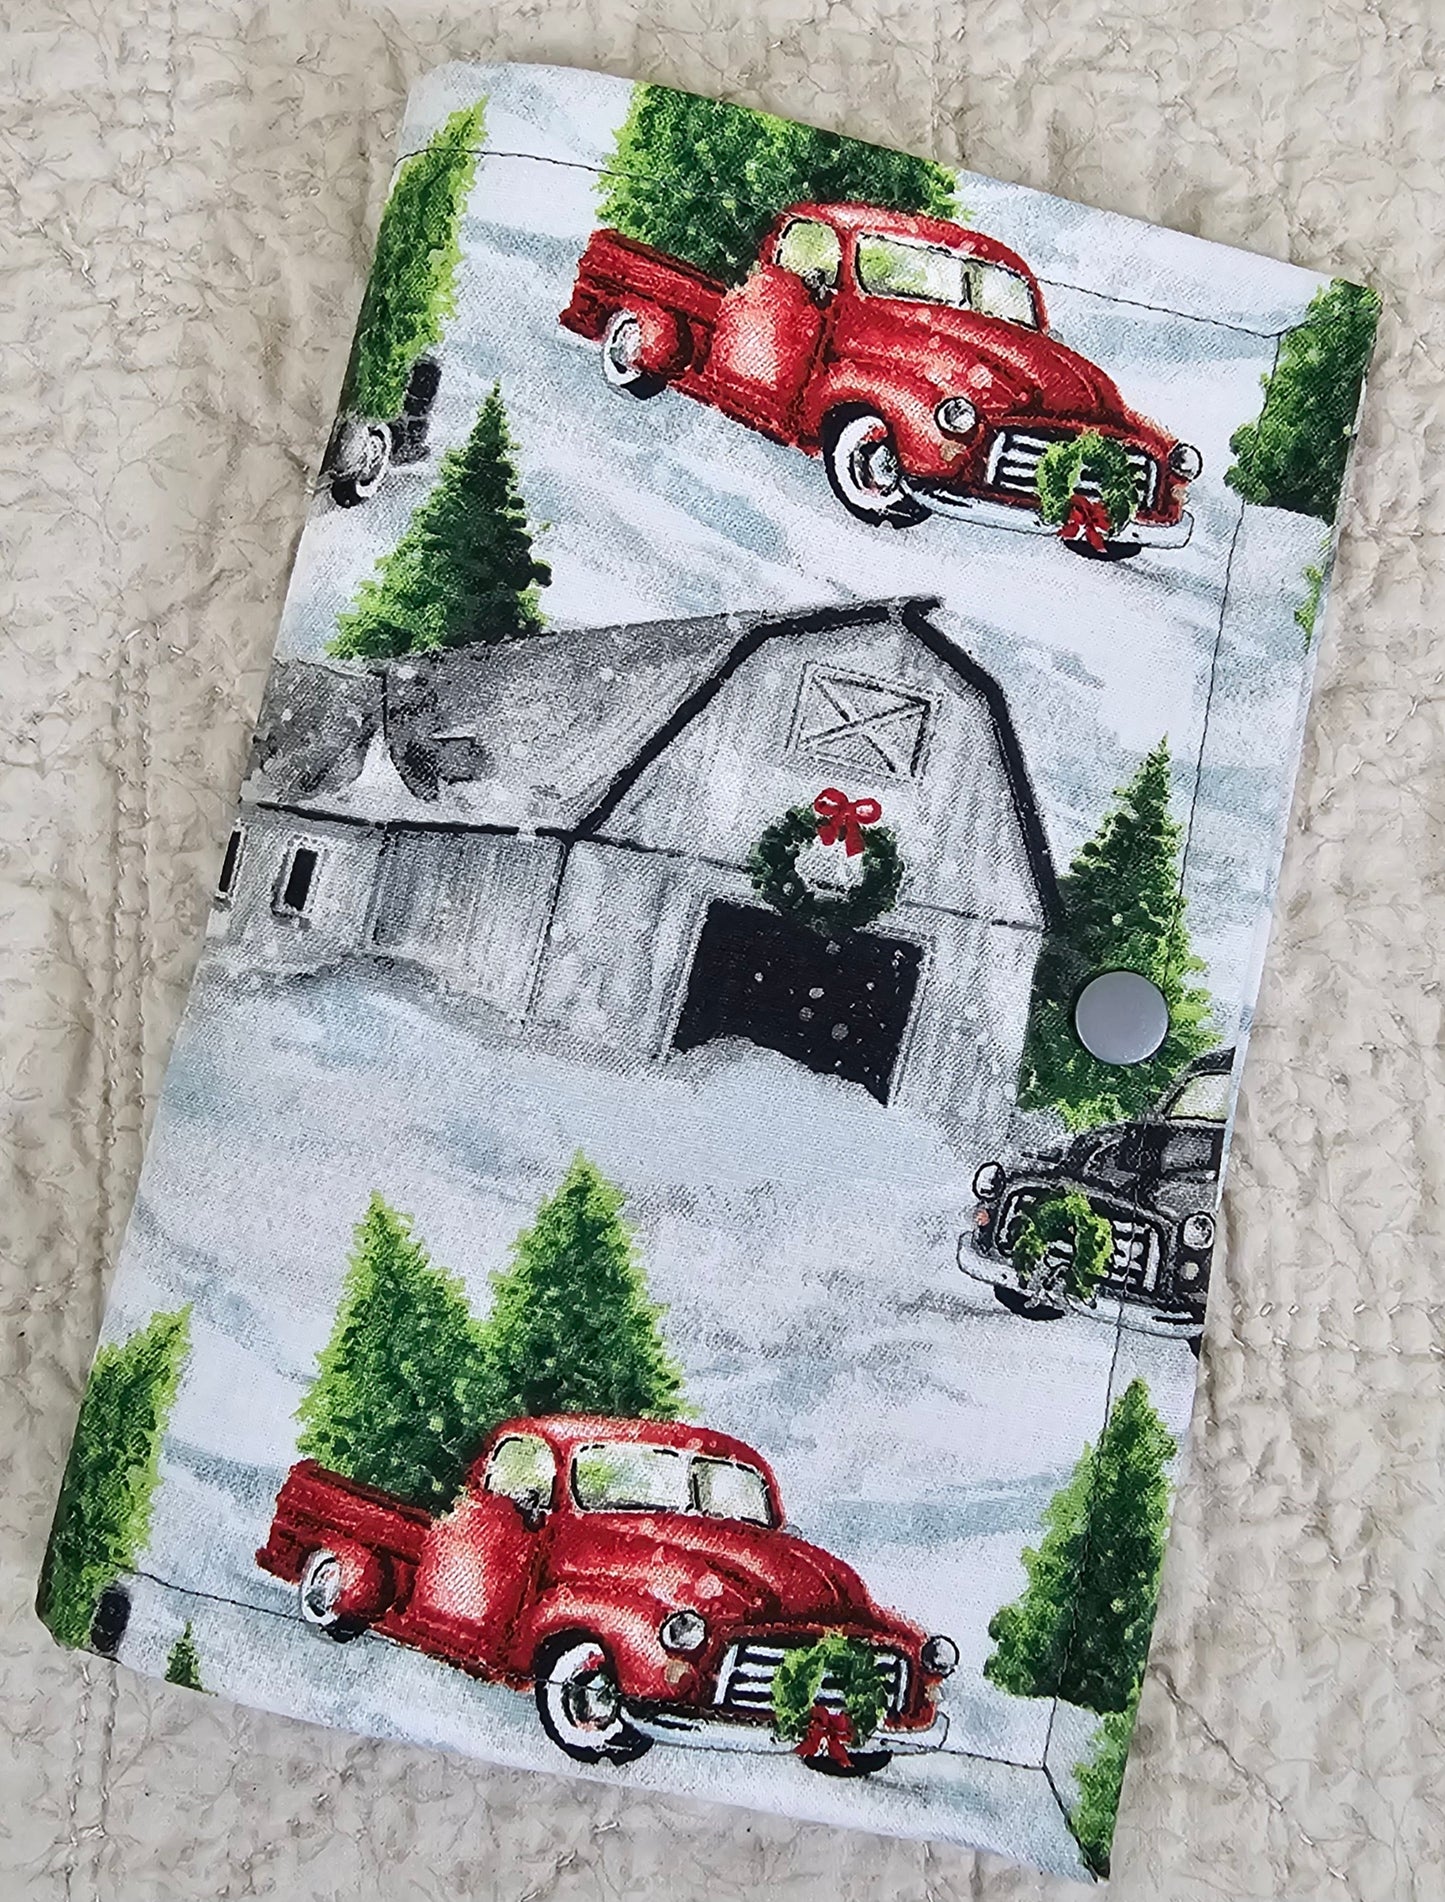 Old Trucks and Christmas Trees Thread Keeper